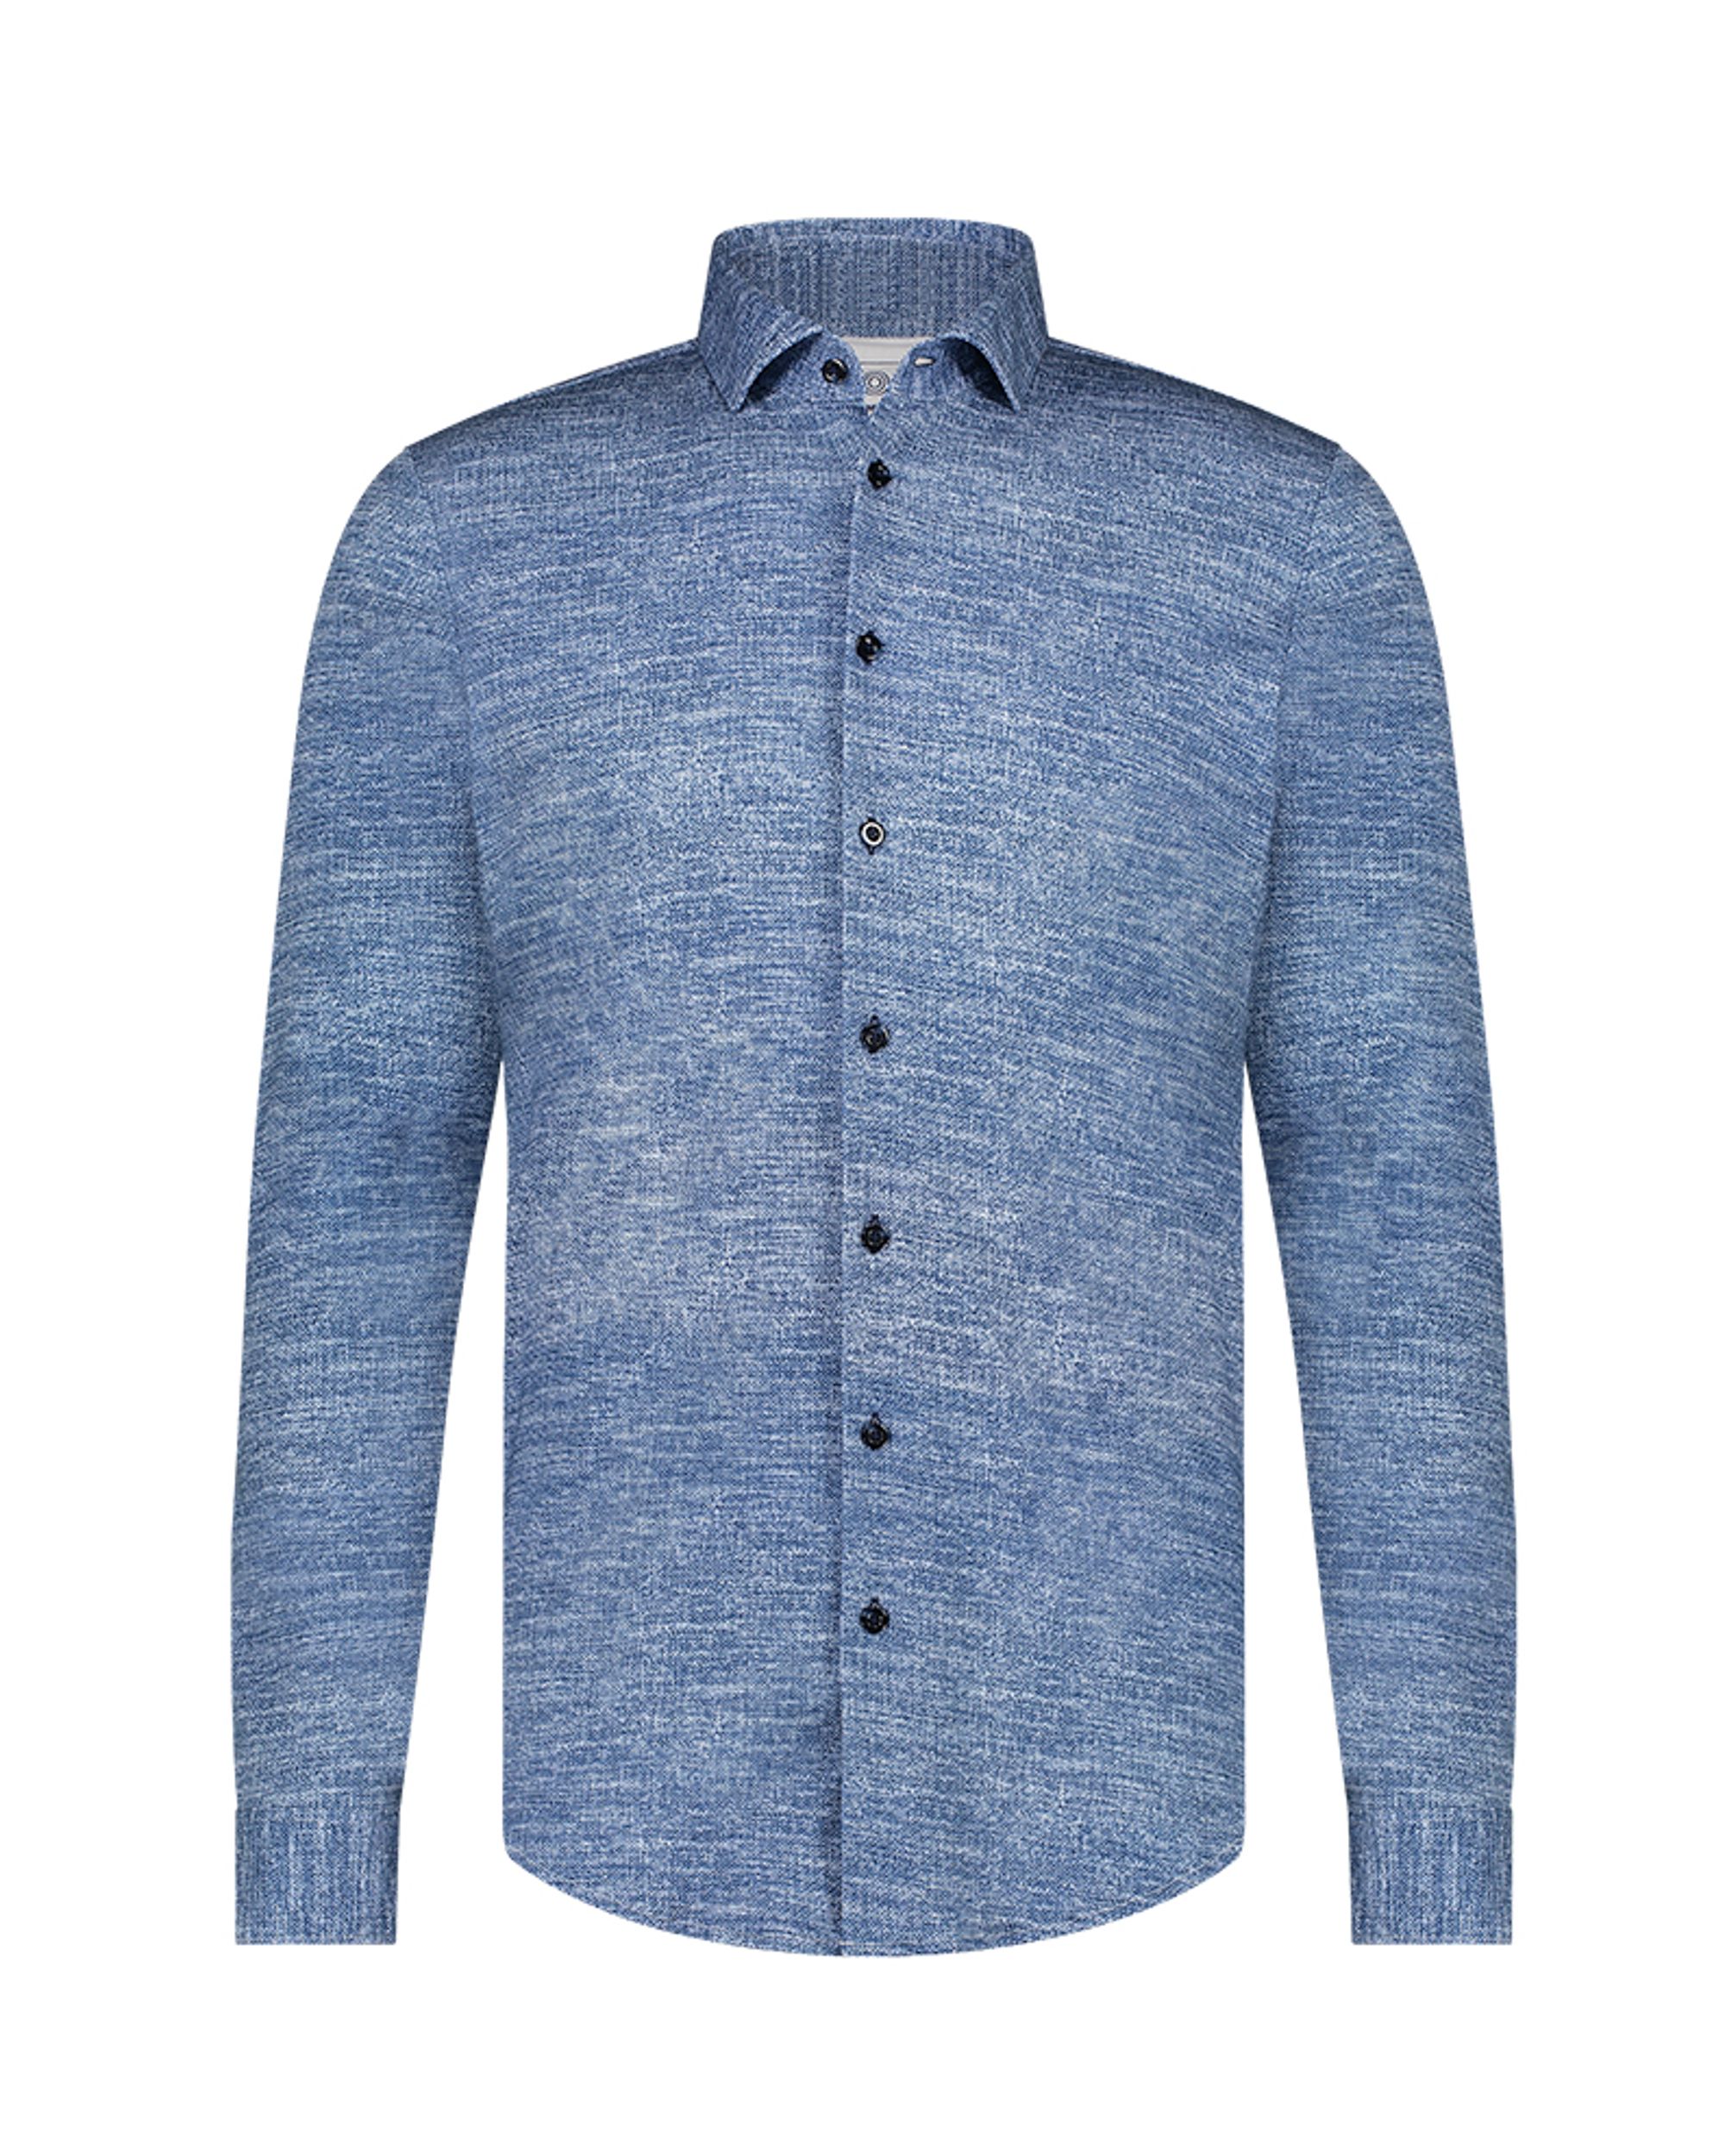 Blue Industry Casual Overhemd LM Blauw 092871-001-37